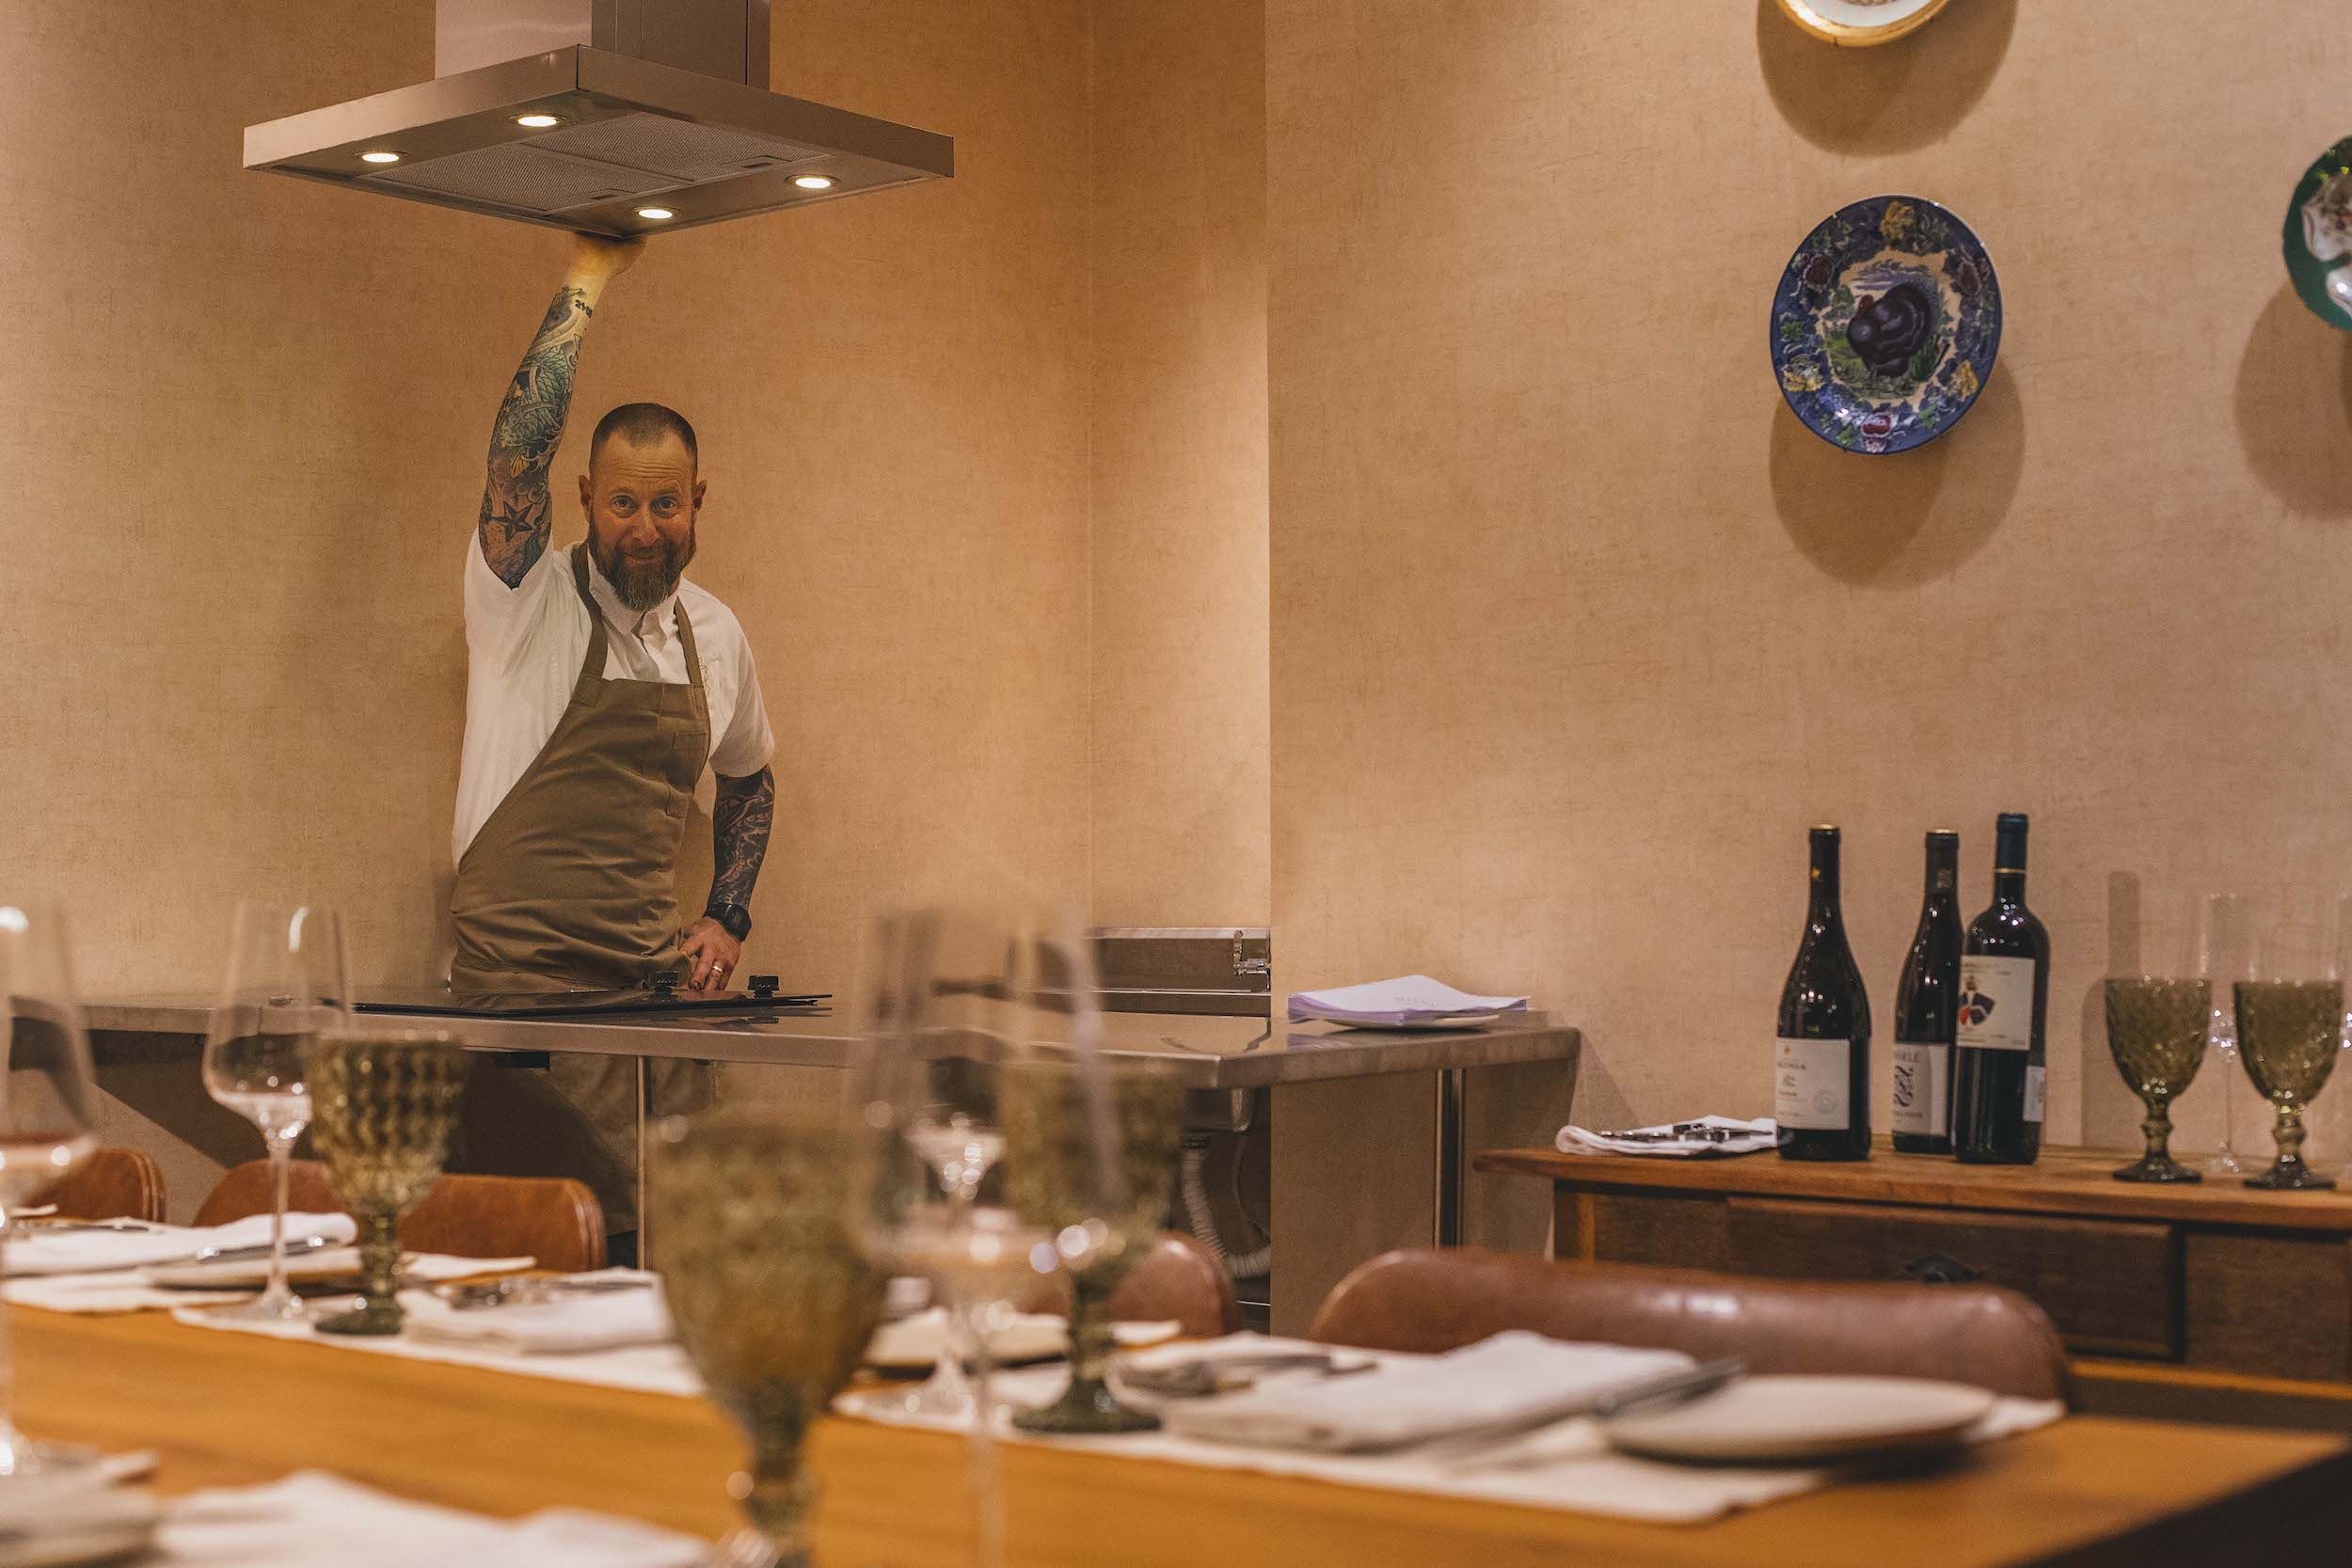 Donna Restaurant, by chef André Mifano, opens a private room for exclusive dinners